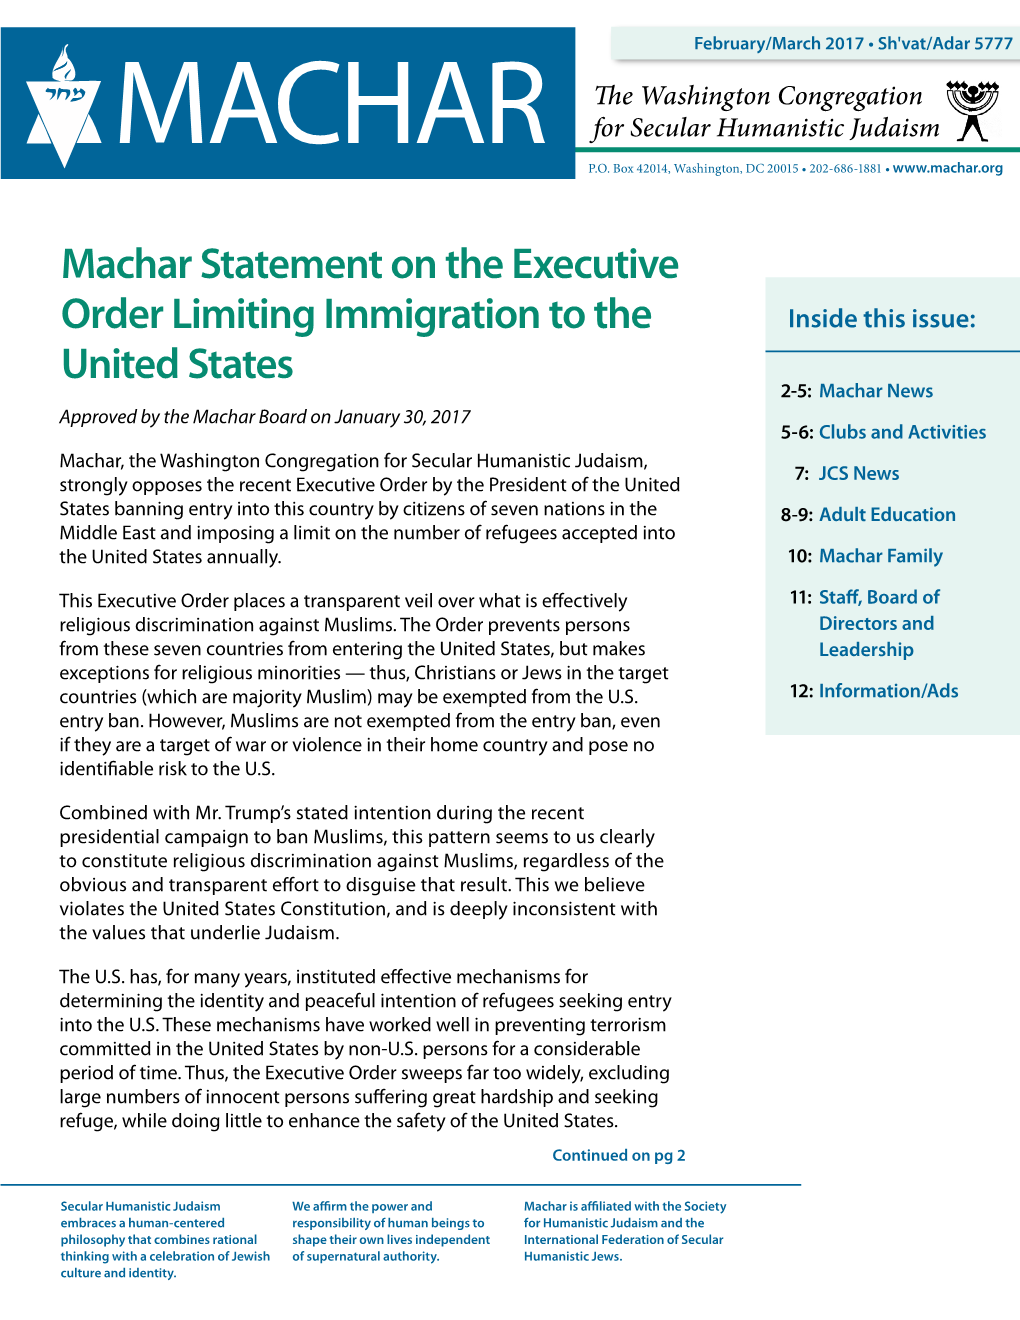 Machar Statement on the Executive Order Limiting Immigration to The